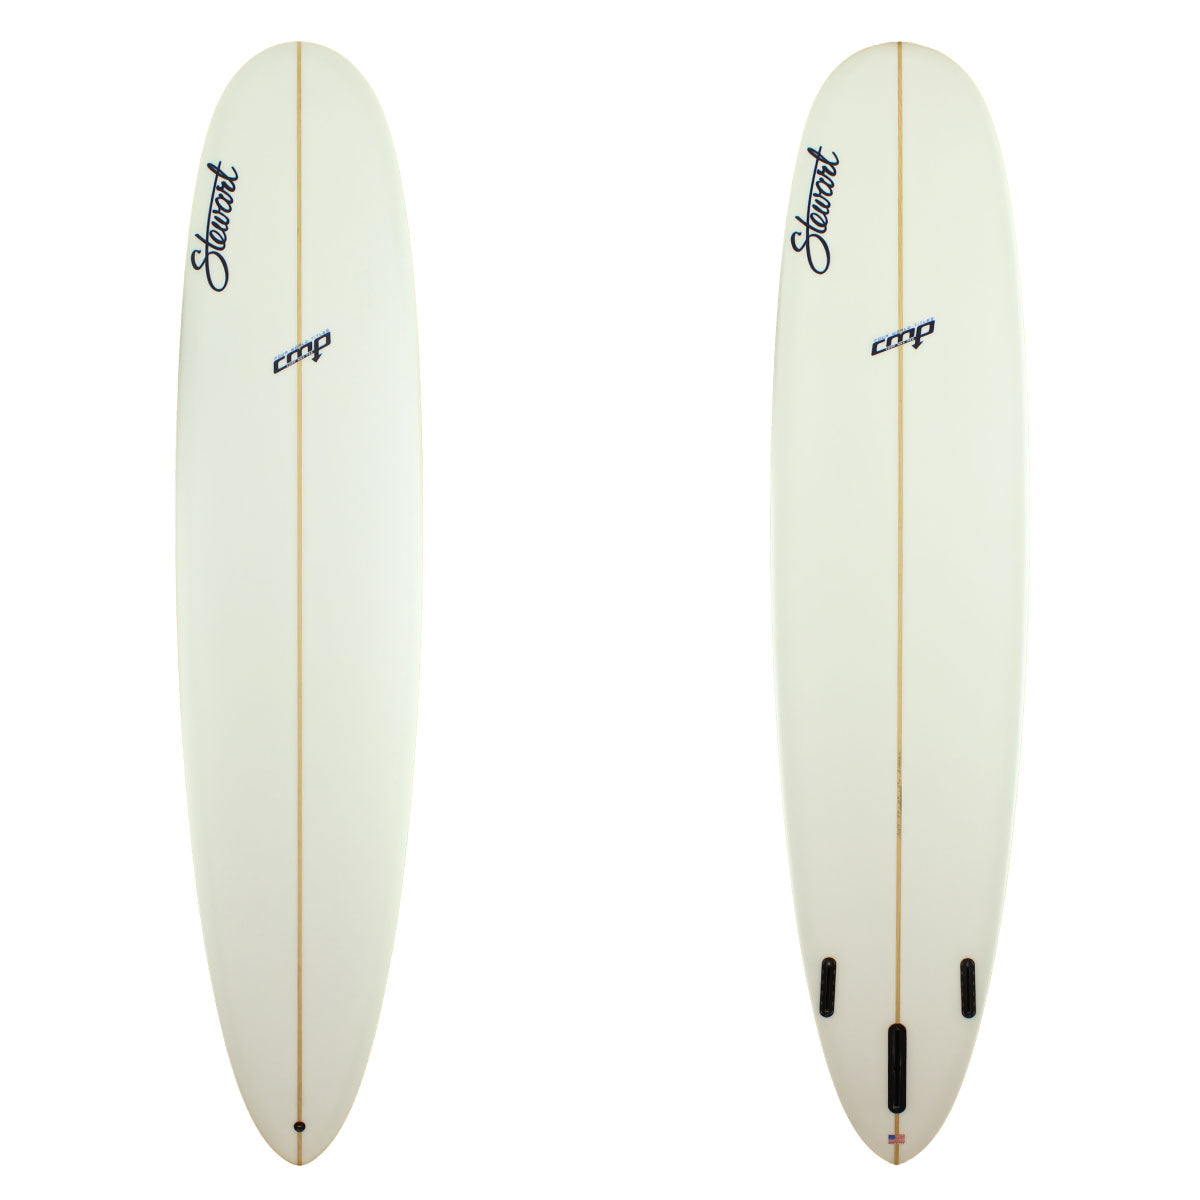 Stewart Surfboards 9'0 CMP longboard with clear white deck and bottom